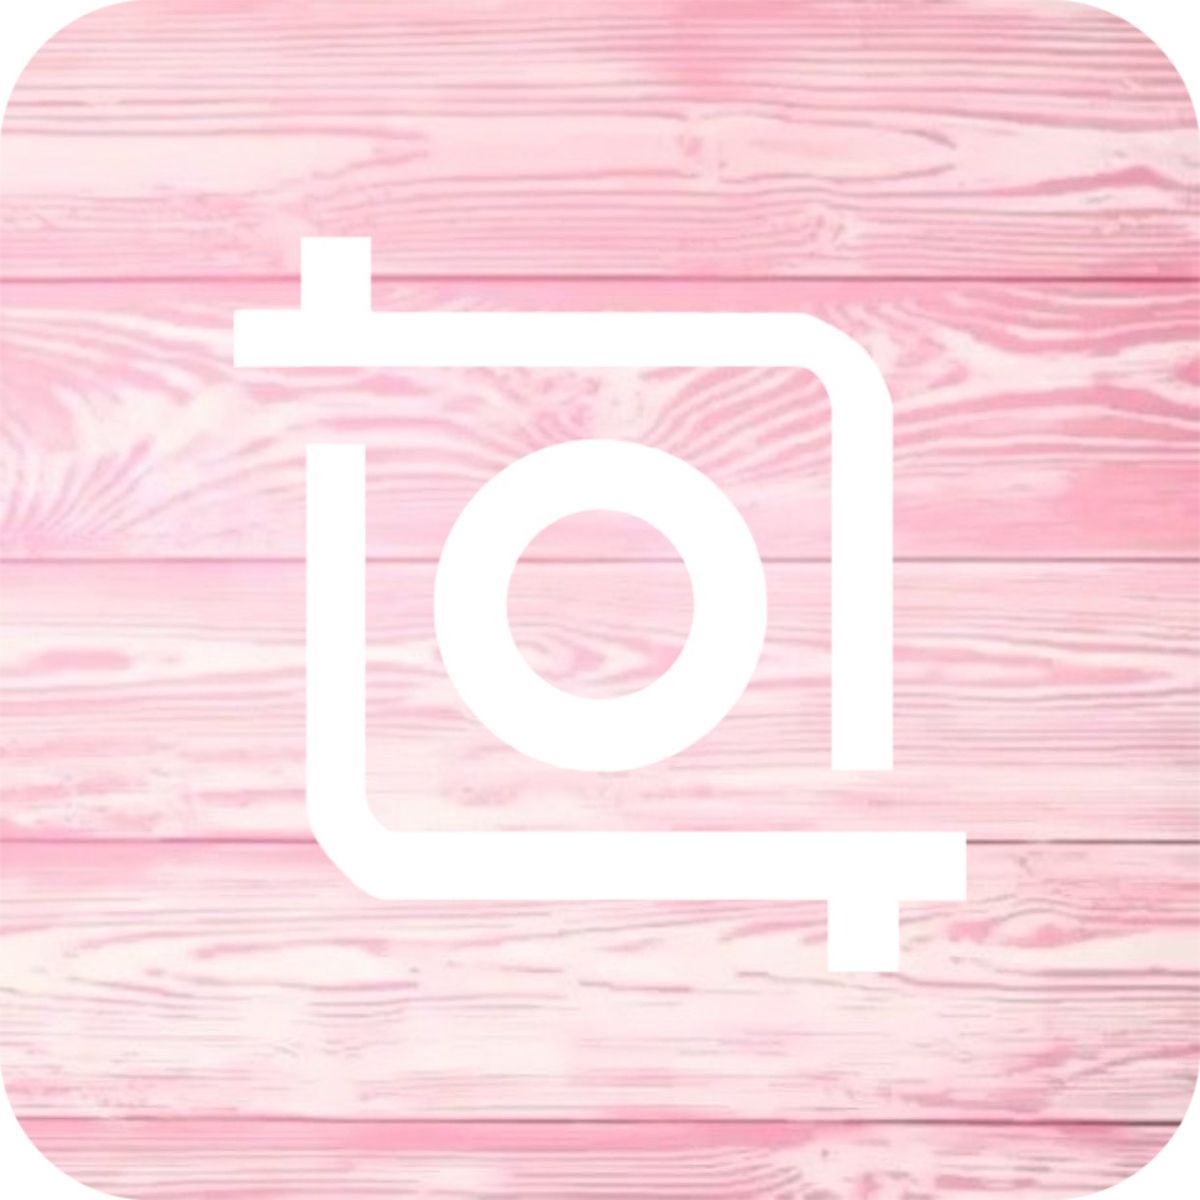 InShot app icon Aesthetic Pink. App icon, Icon, Pastel pink aesthetic